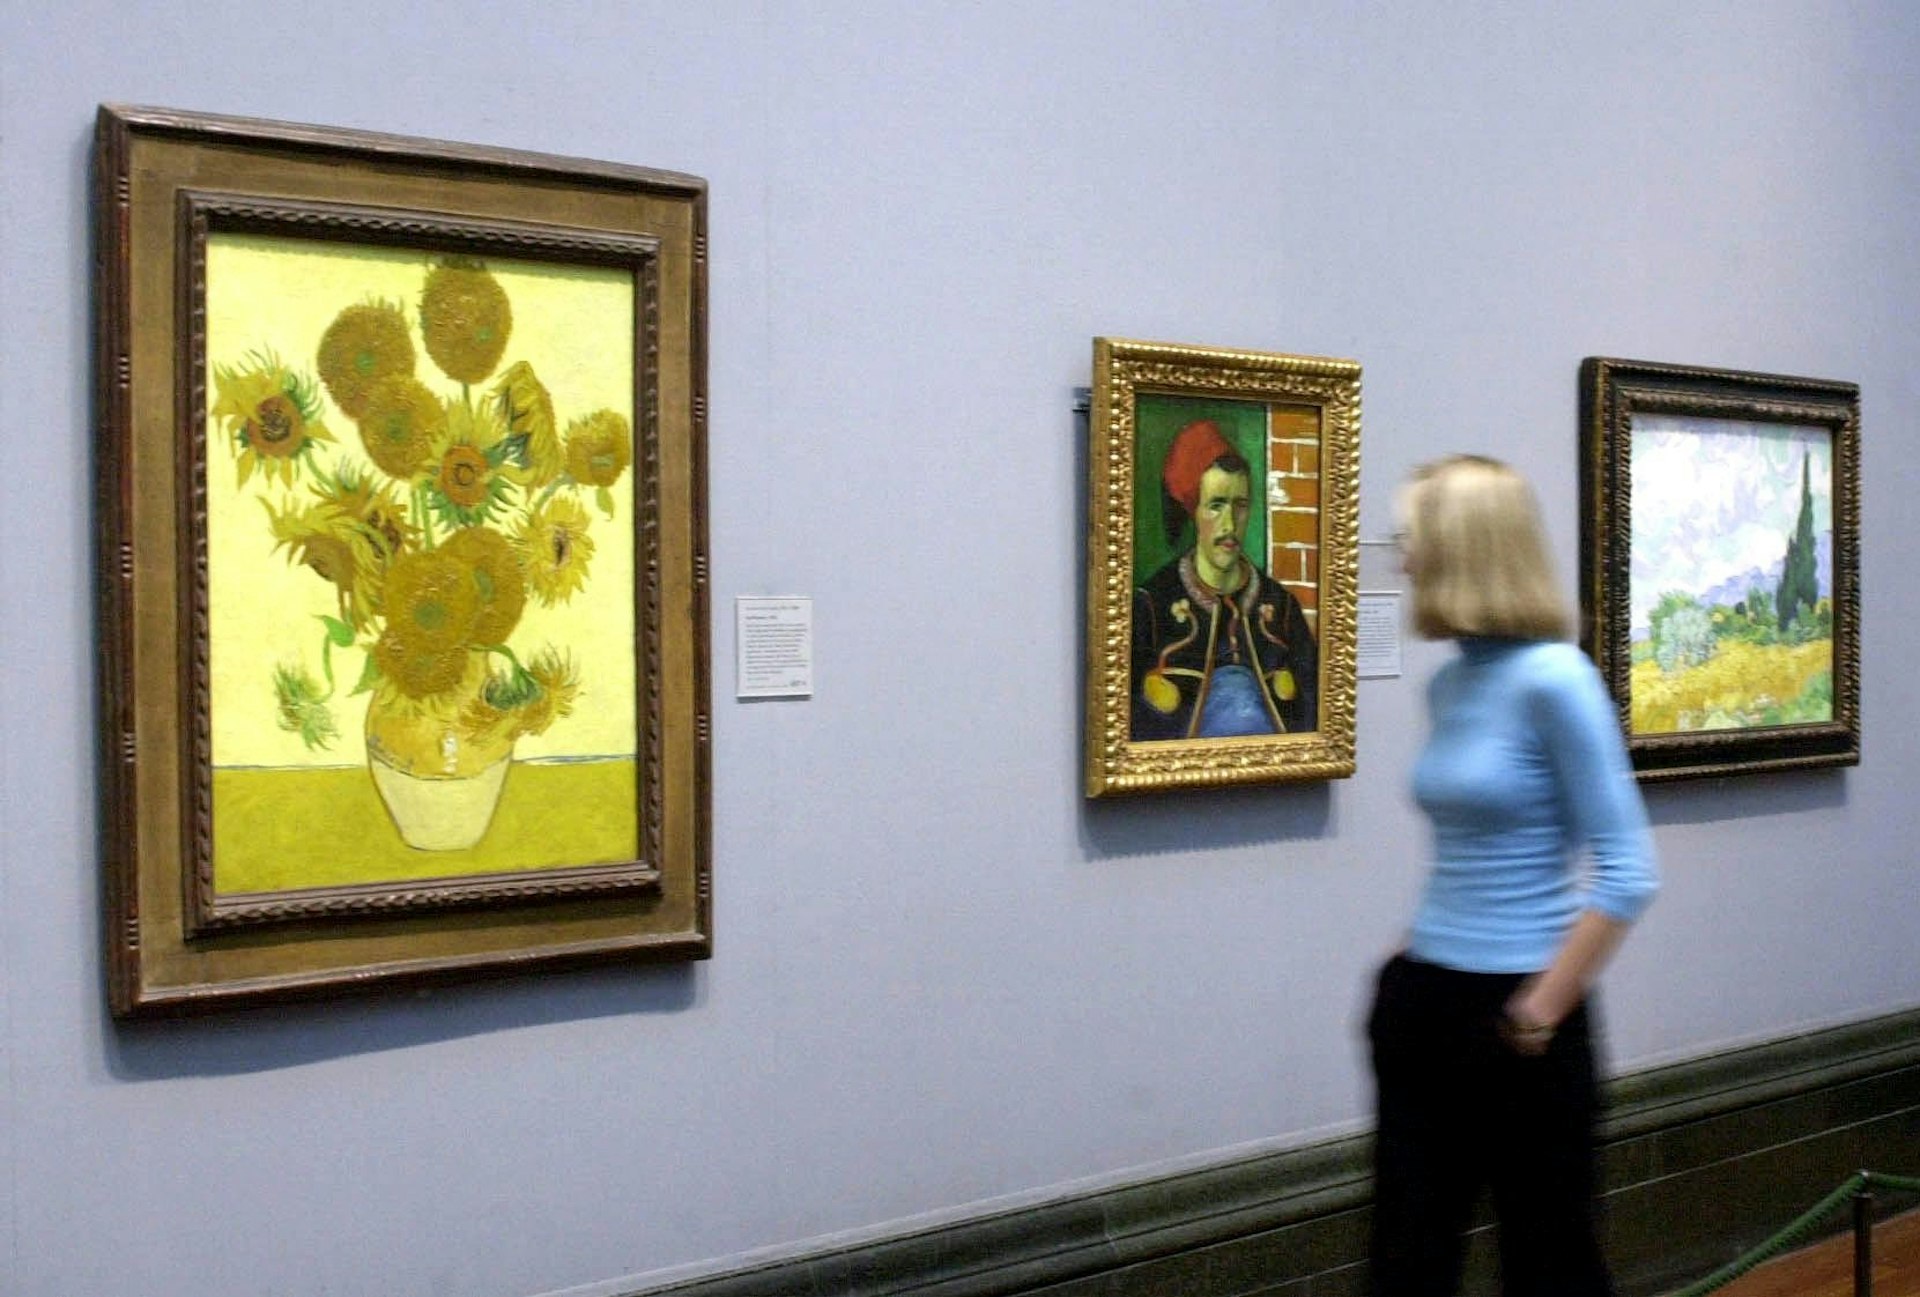 A passer by views a painting of sunflowers by Van Gogh, on display at London's National Gallery.